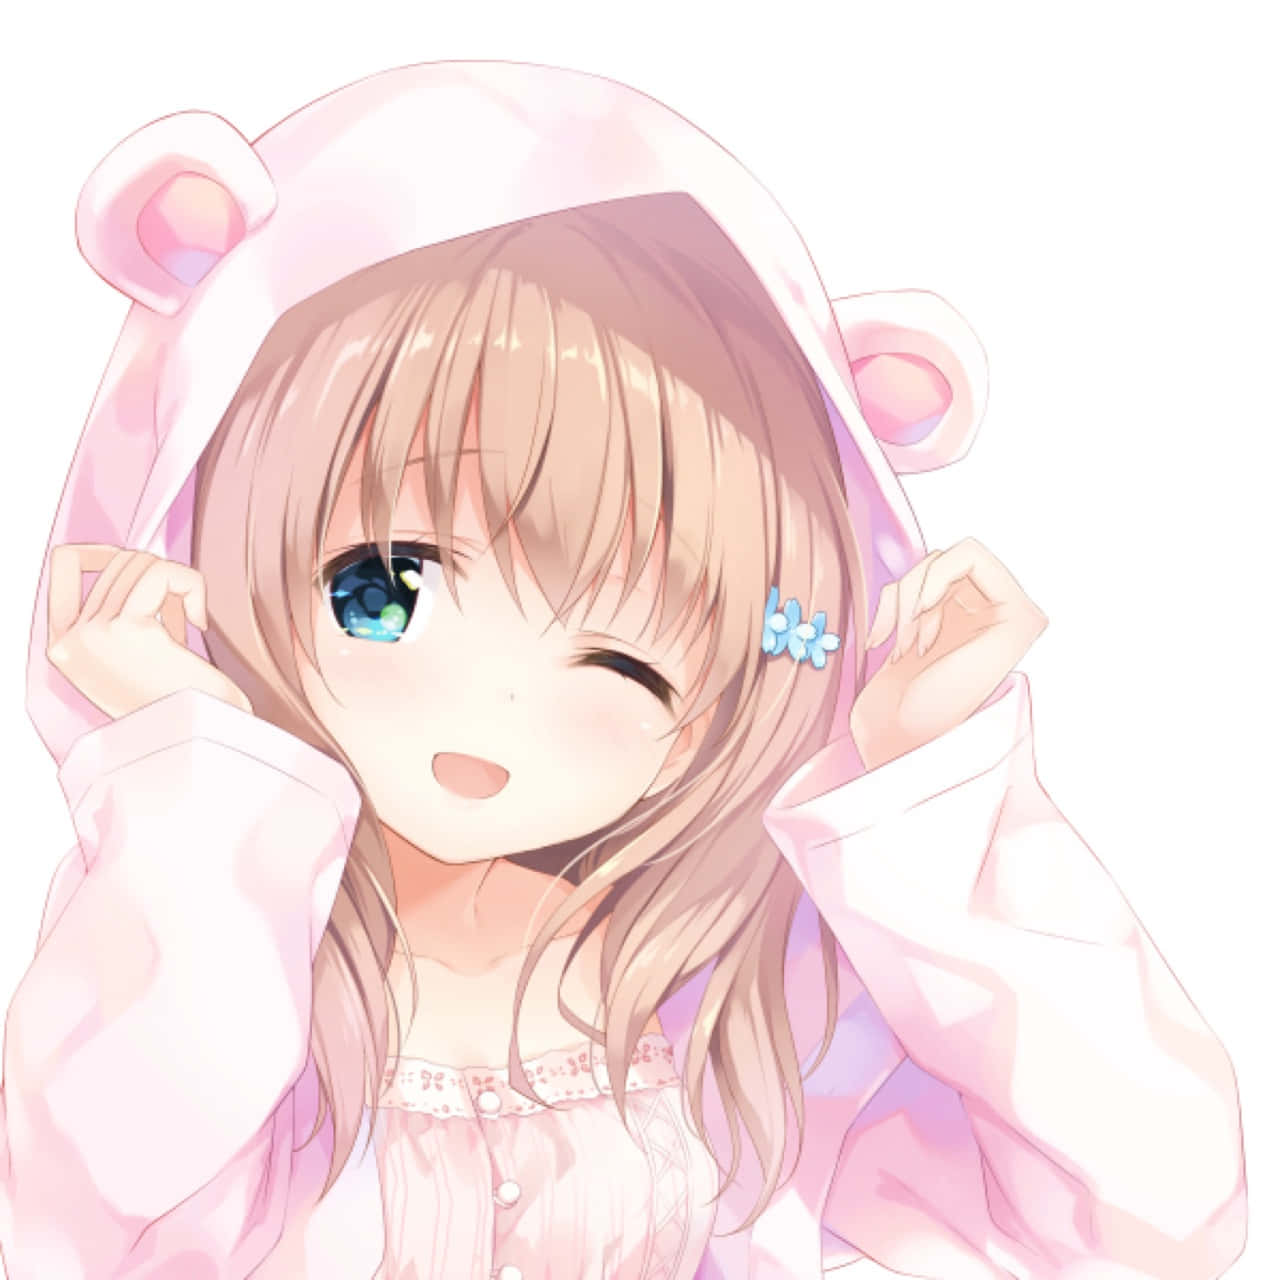 Cute Anime Girl In Hoodie Profile Picture 1280 x 1280 Picture